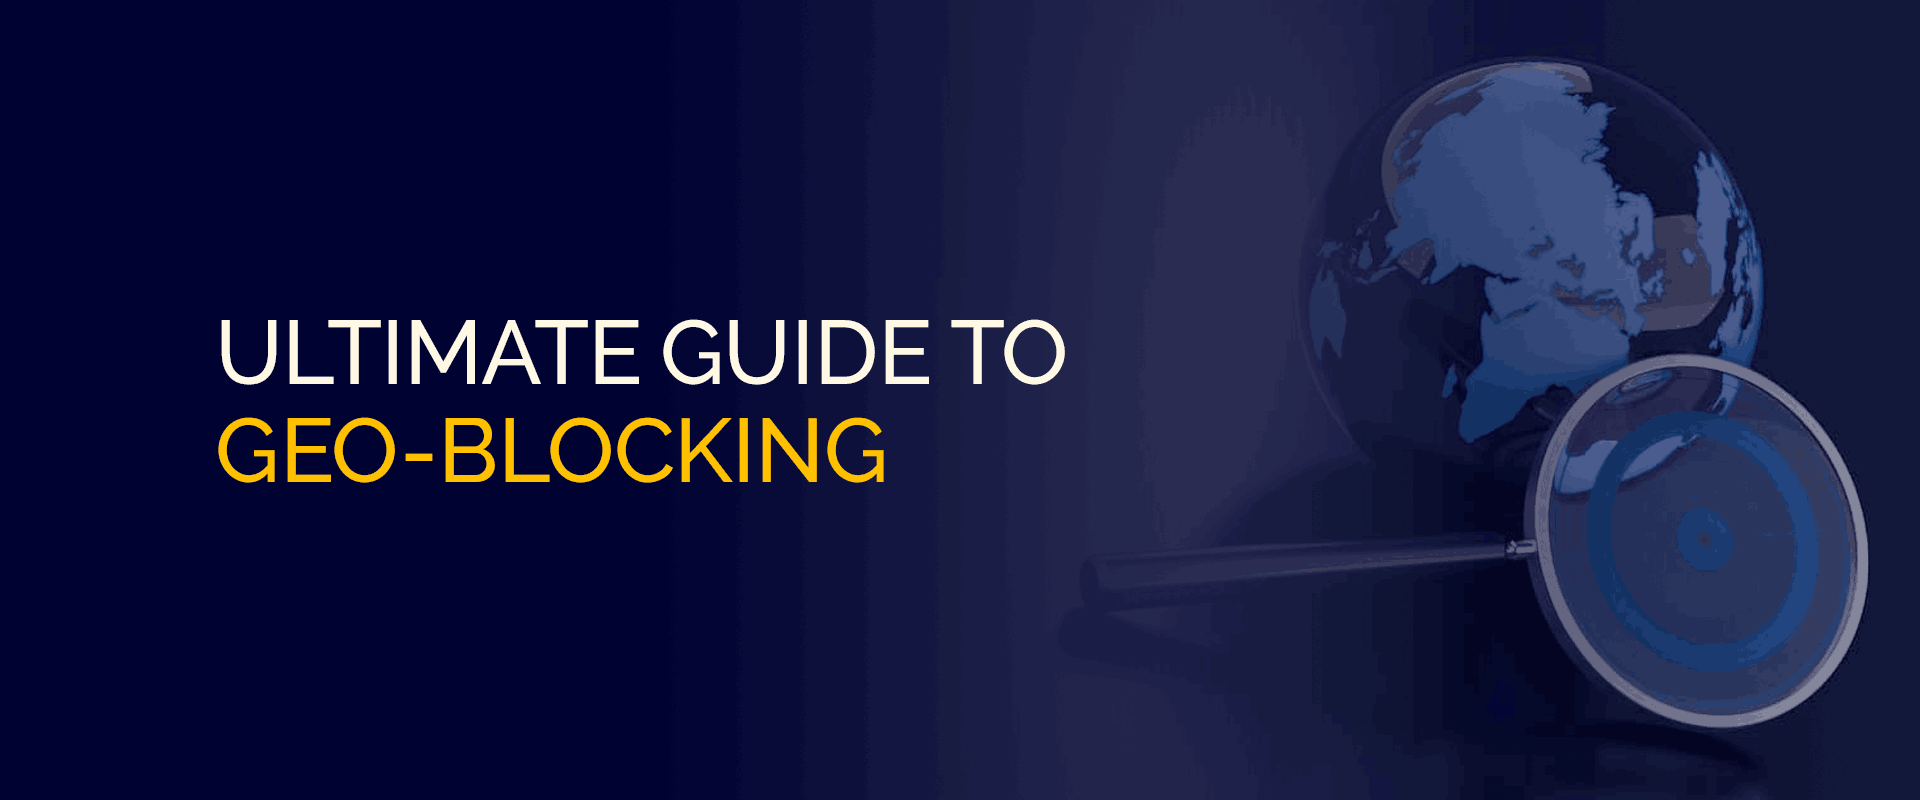 Ultimate Guide to Geo-Blocking